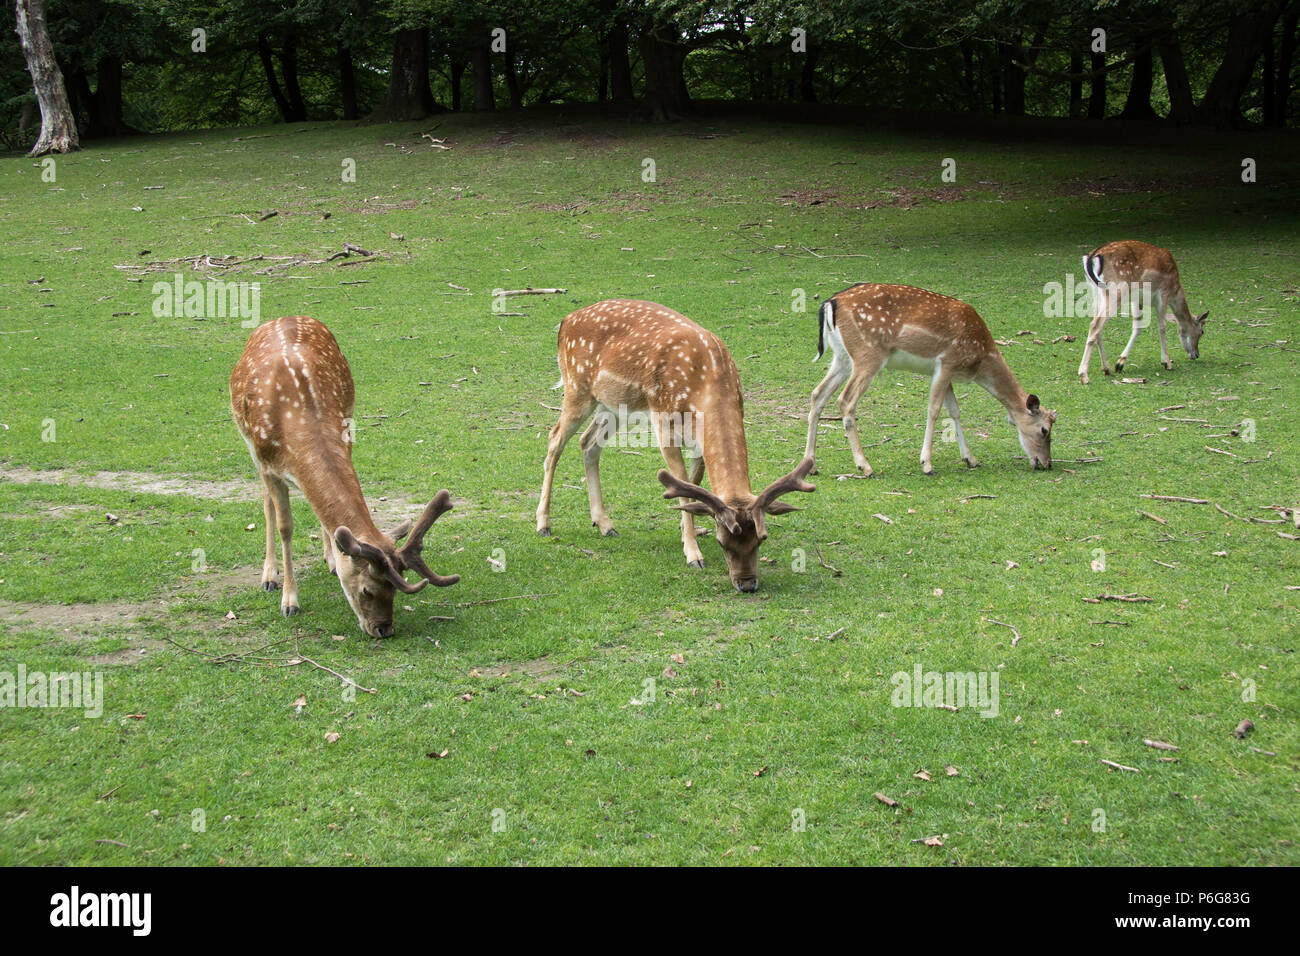 Four young Sika Deer grassing in an outdoor enclosure in Denmark Stock Photo